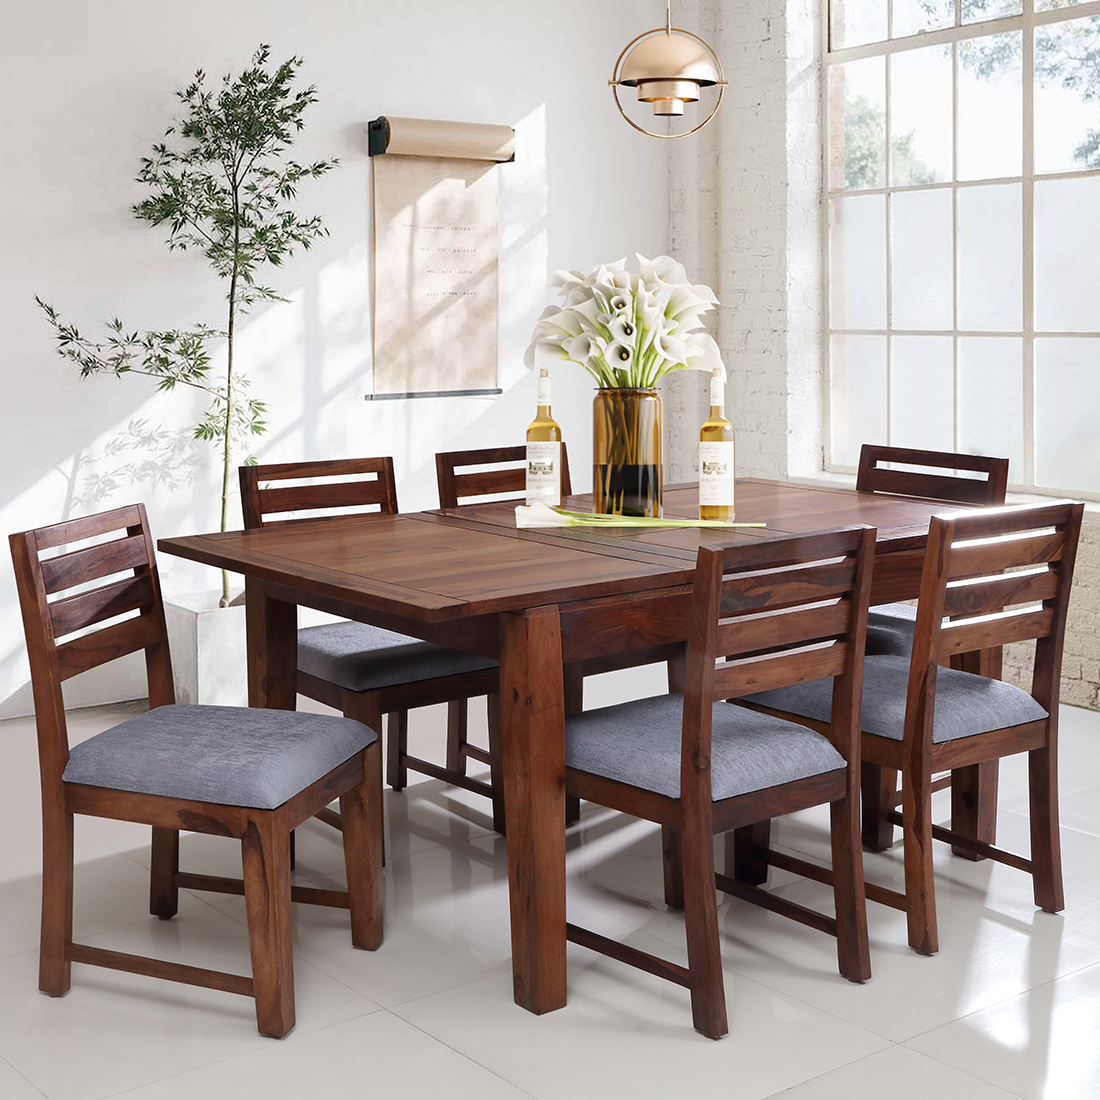 Vivien Solidwood Extendable Dining, Extendable Dining Room Table And Chairs